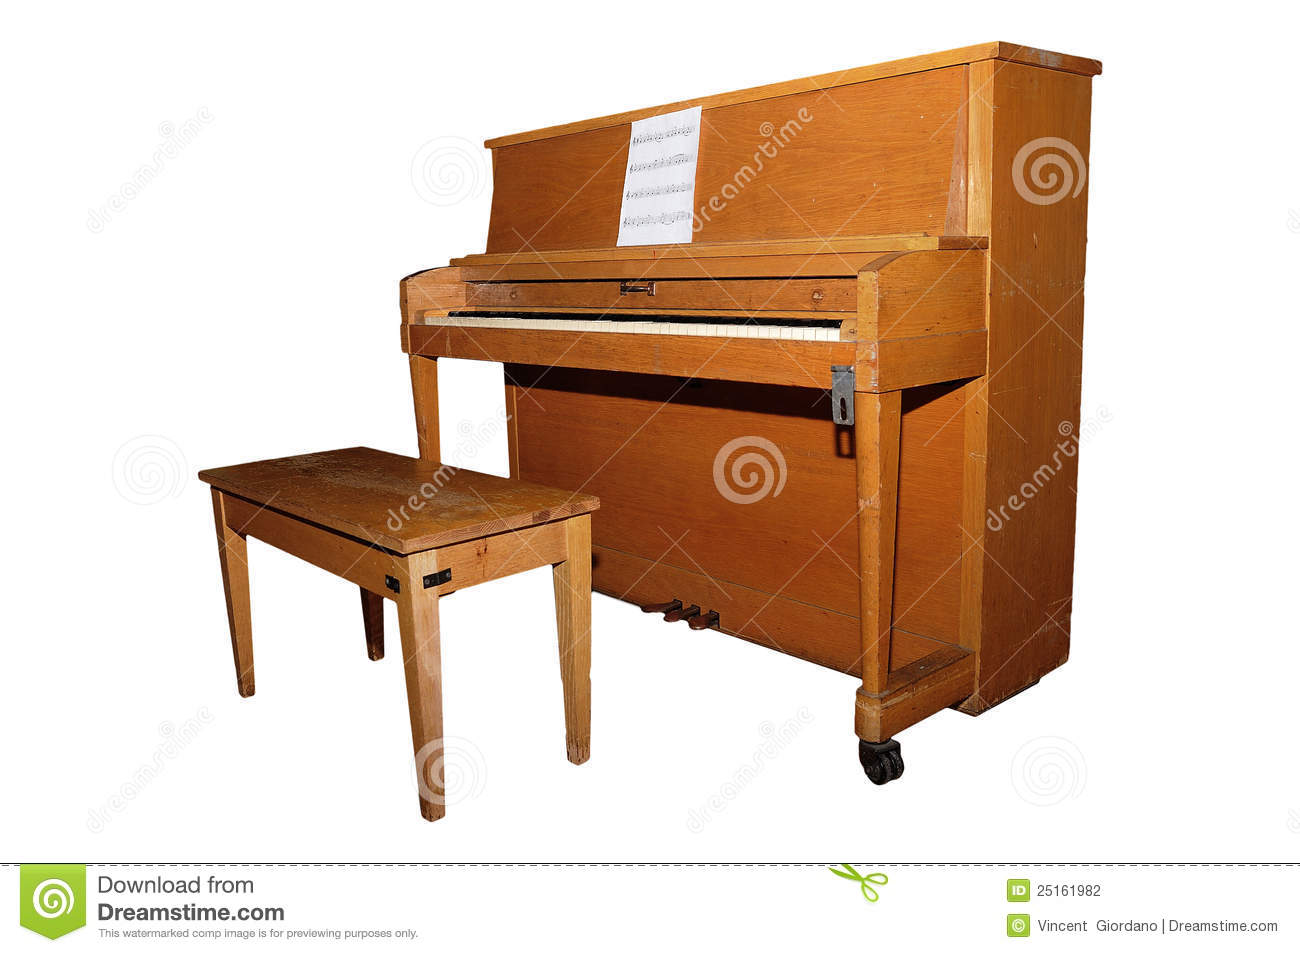 Upright Piano Clipart Upright Piano Clipart Cake Ideas And Designs